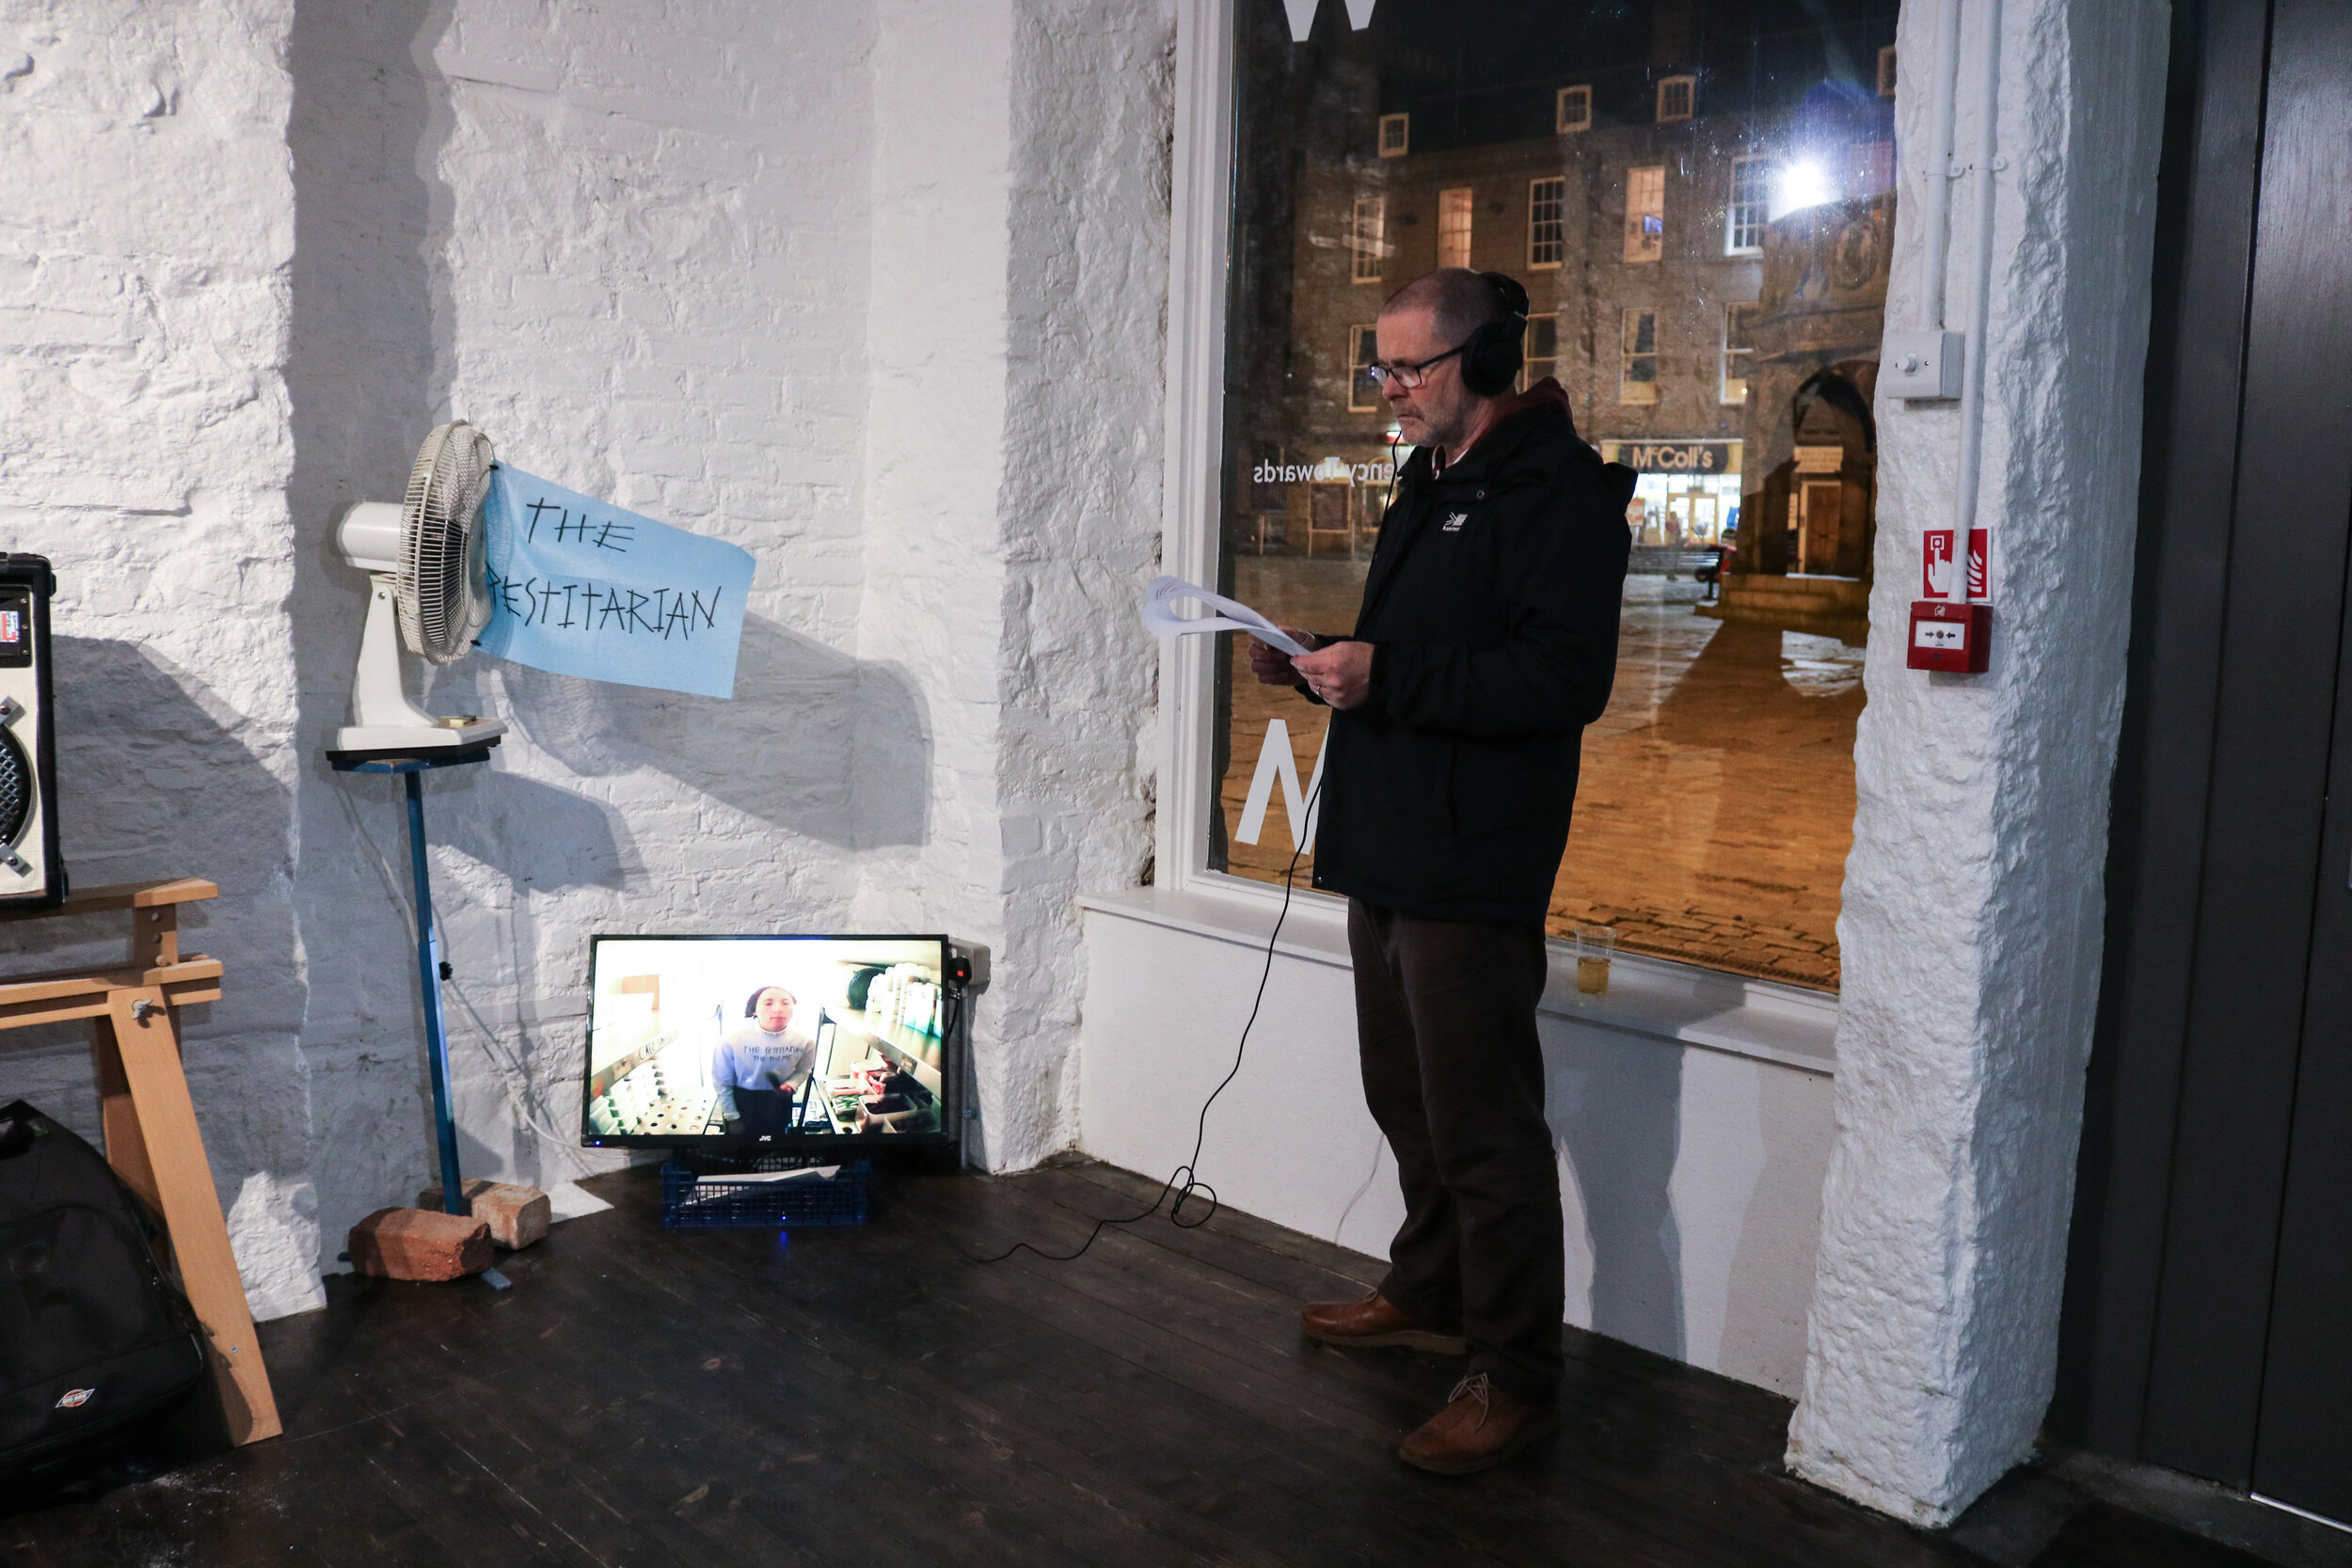 Aberdeen Artist Collective 'Tendency Towards' Exhibition Opening Night